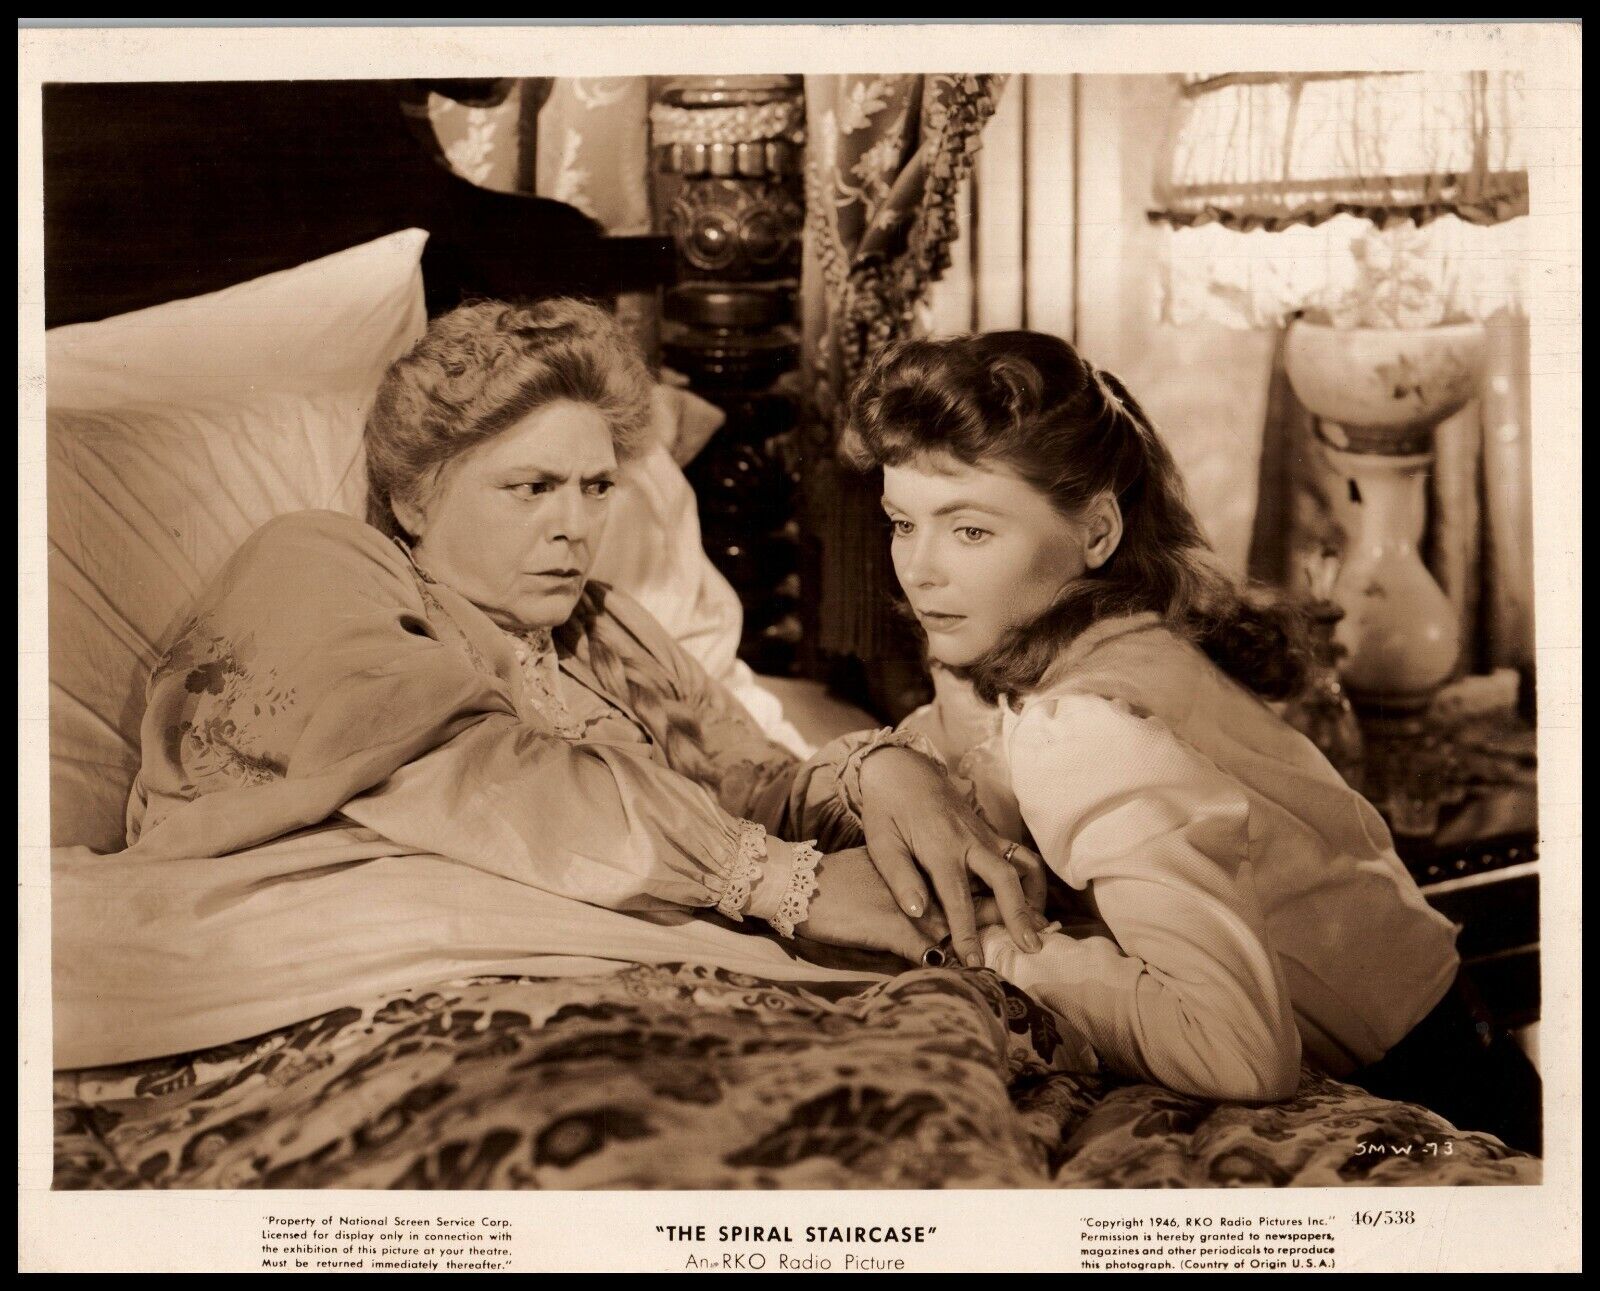 Ethel Barrymore + Dorothy McGuire in The Spiral Staircase (1946) PHOTO M 78